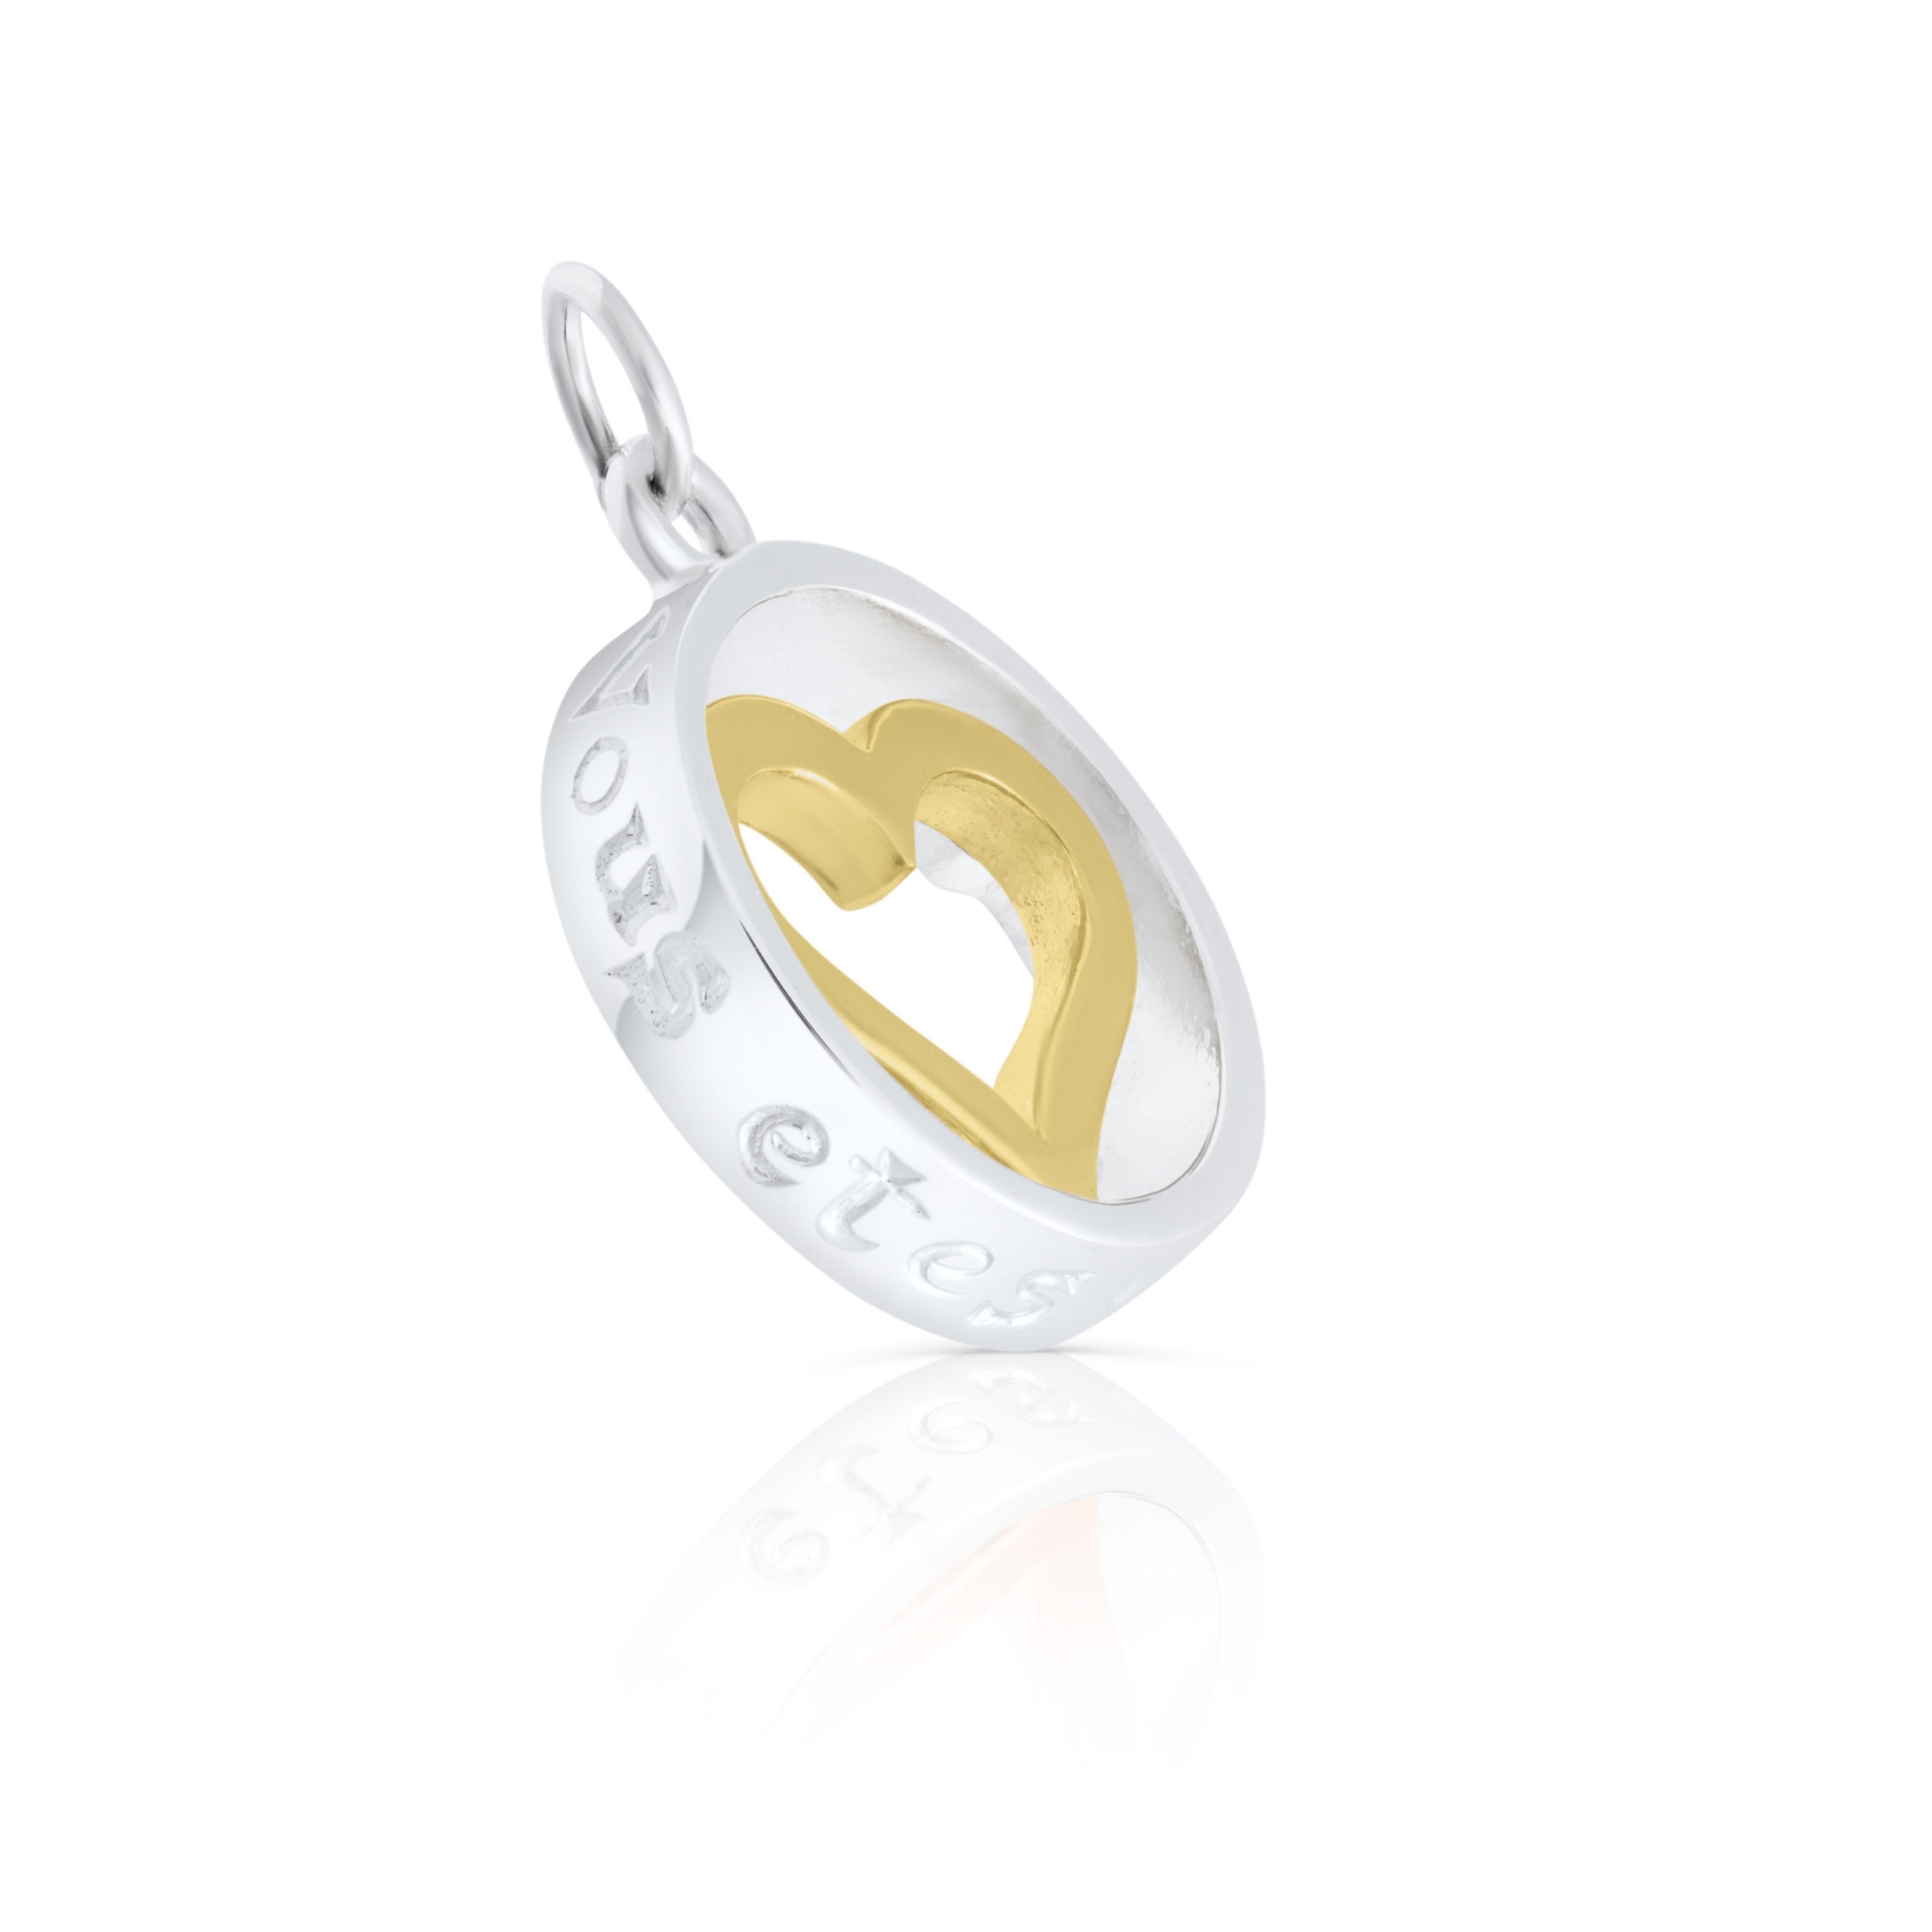 Sterling Silver & 9ct Yellow Gold Heart Charm / Pendant